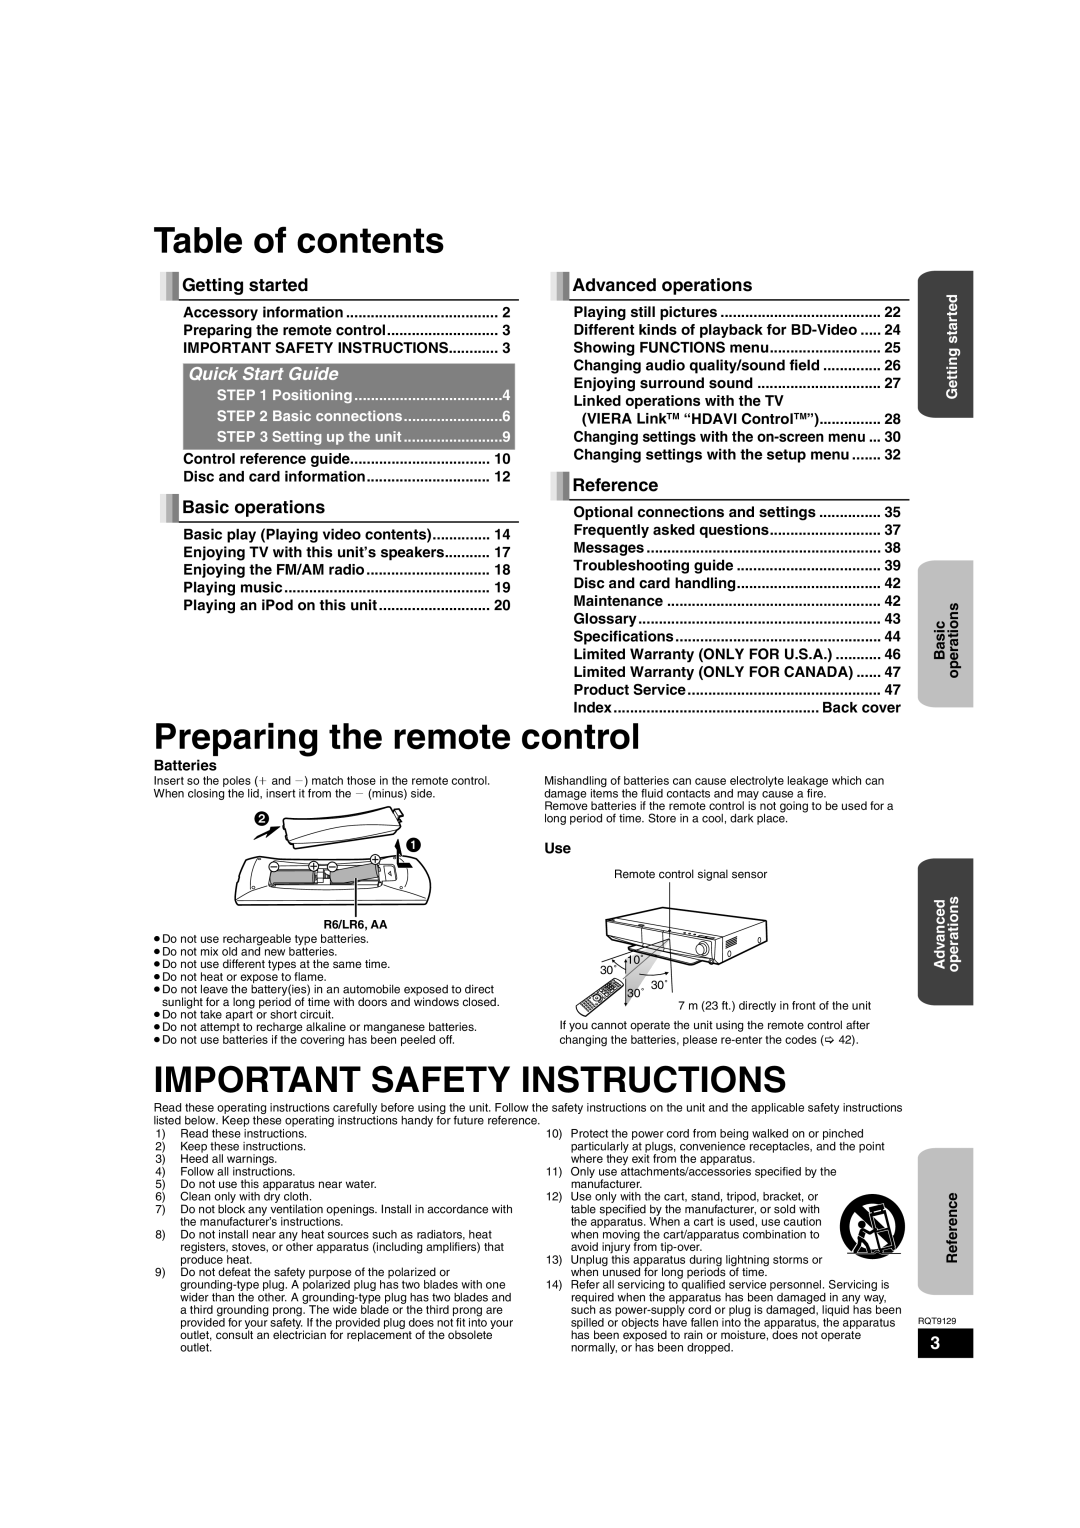 Panasonic SC-BT100 warranty Table of contents, Preparing the remote control, Important Safety Instructions, Getting started 